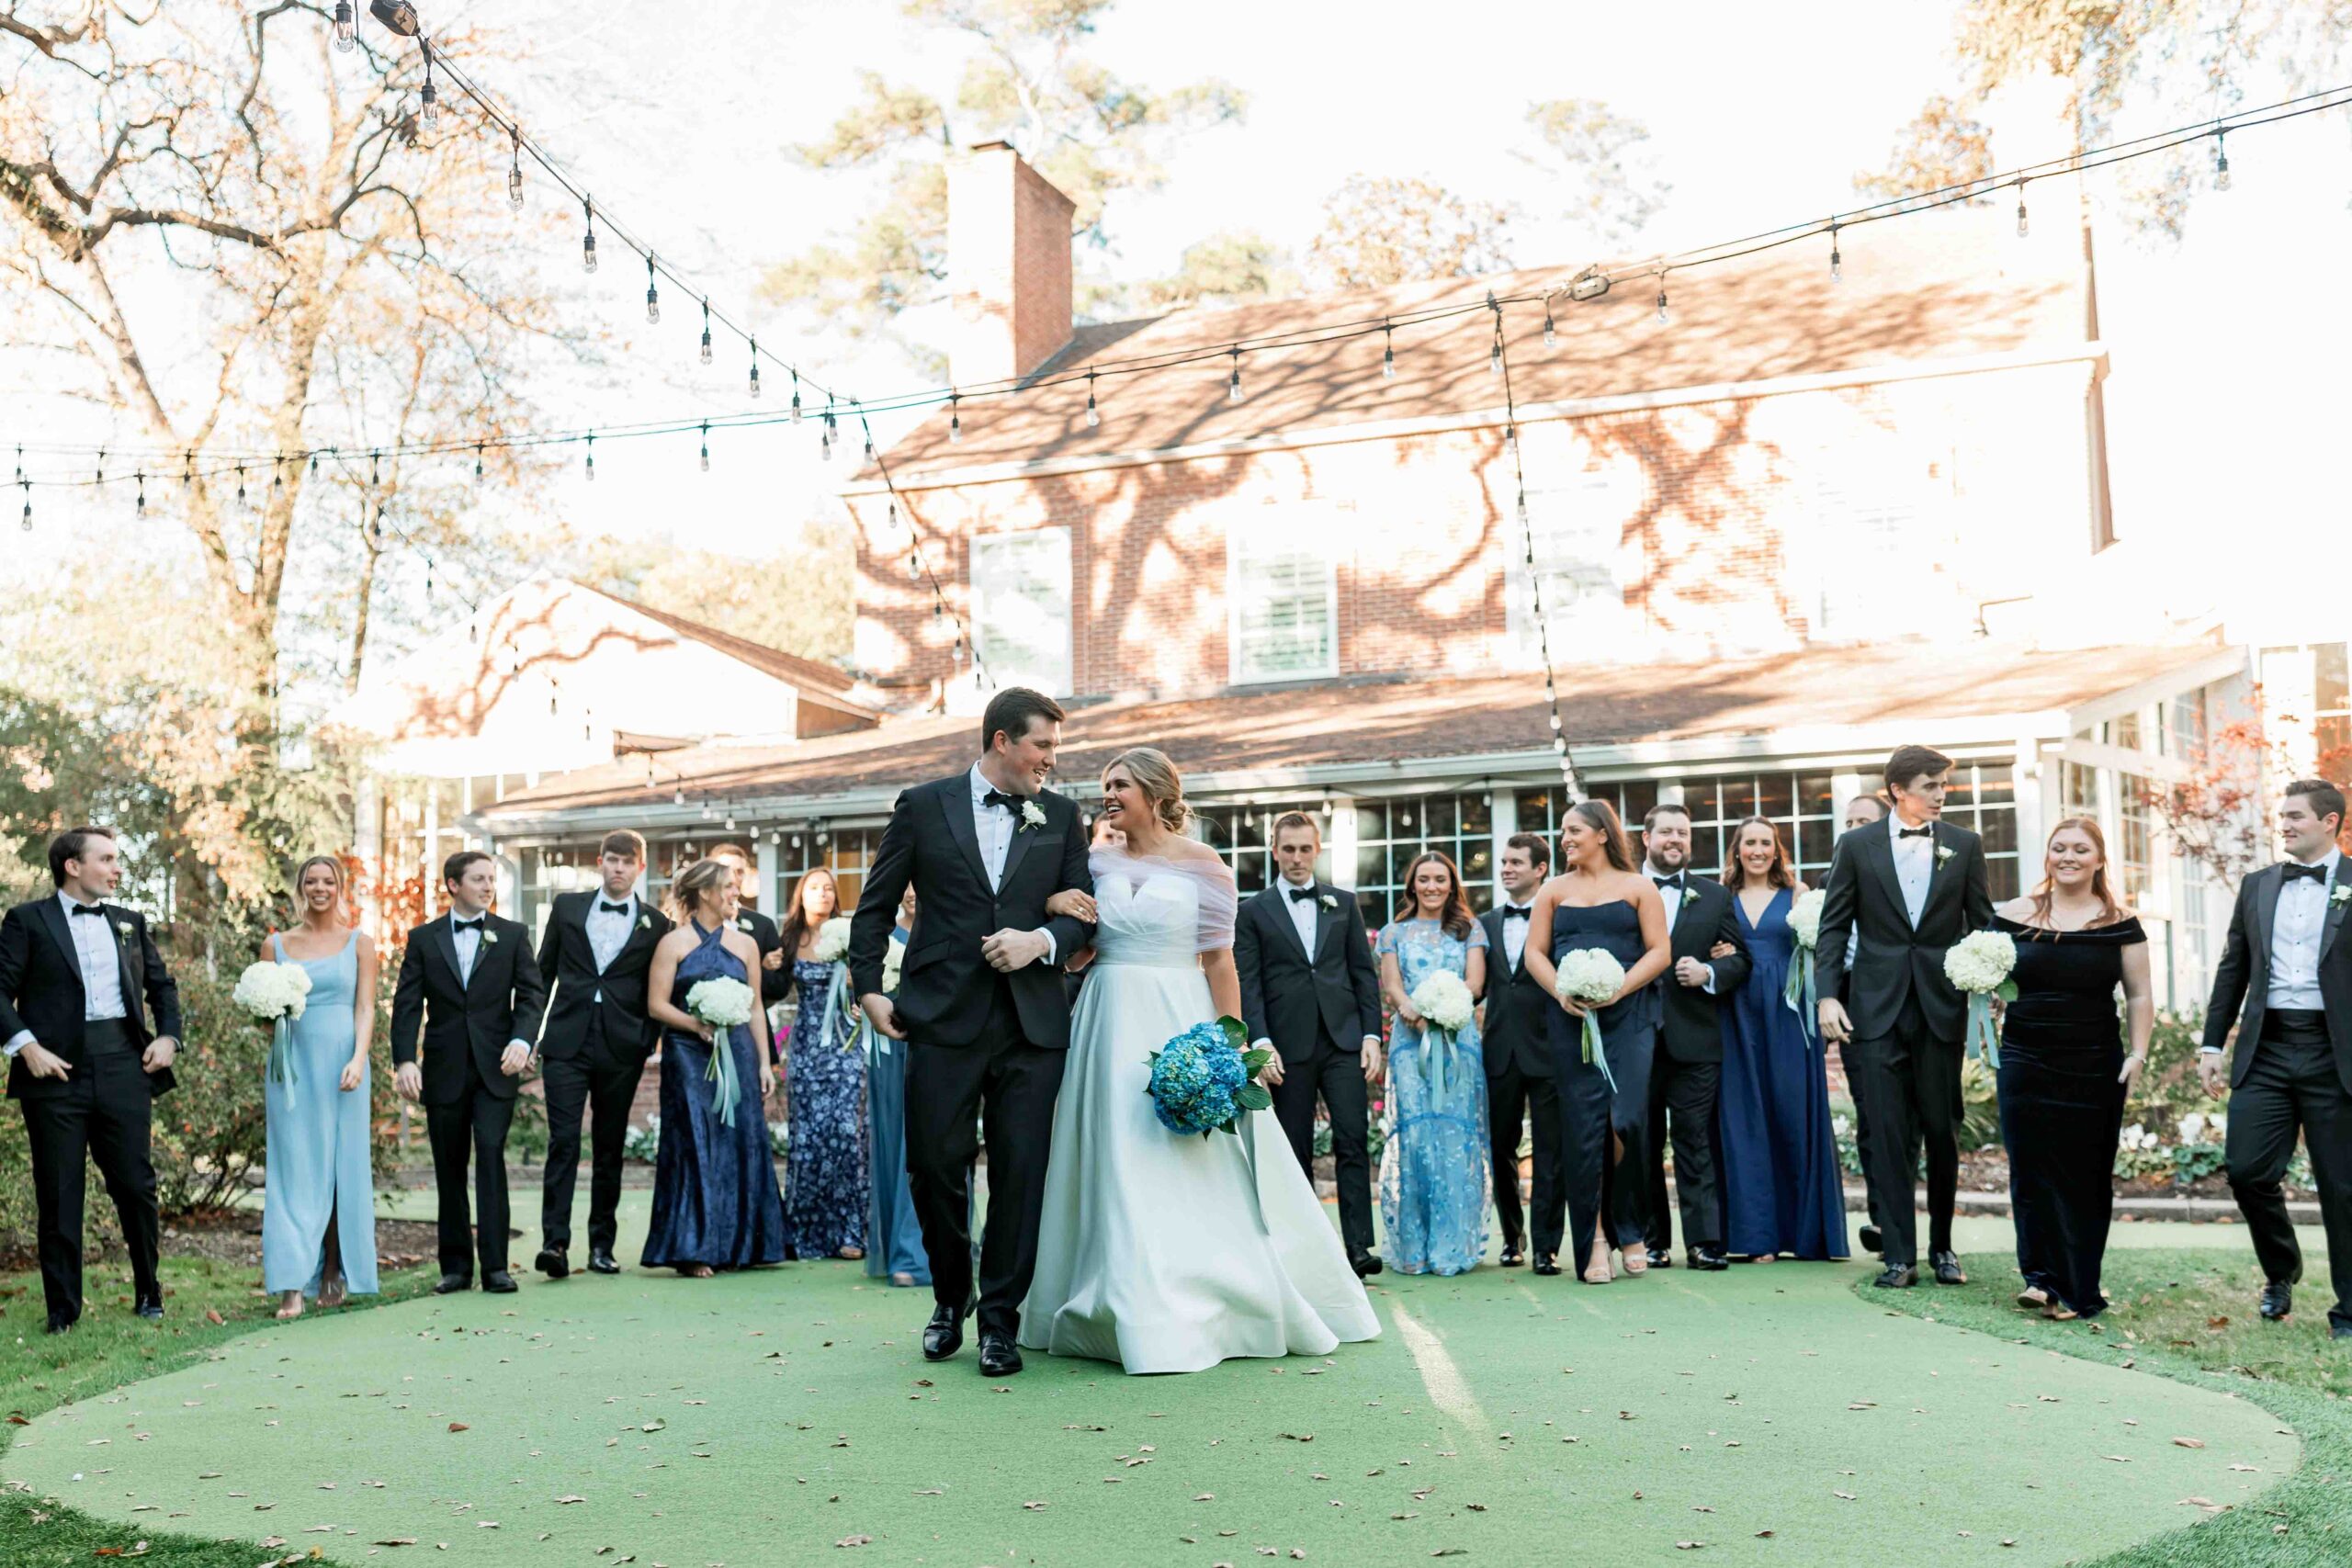 Bridal Party celebrates the couple with outdoor vows at their Houston outdoor wedding venue.